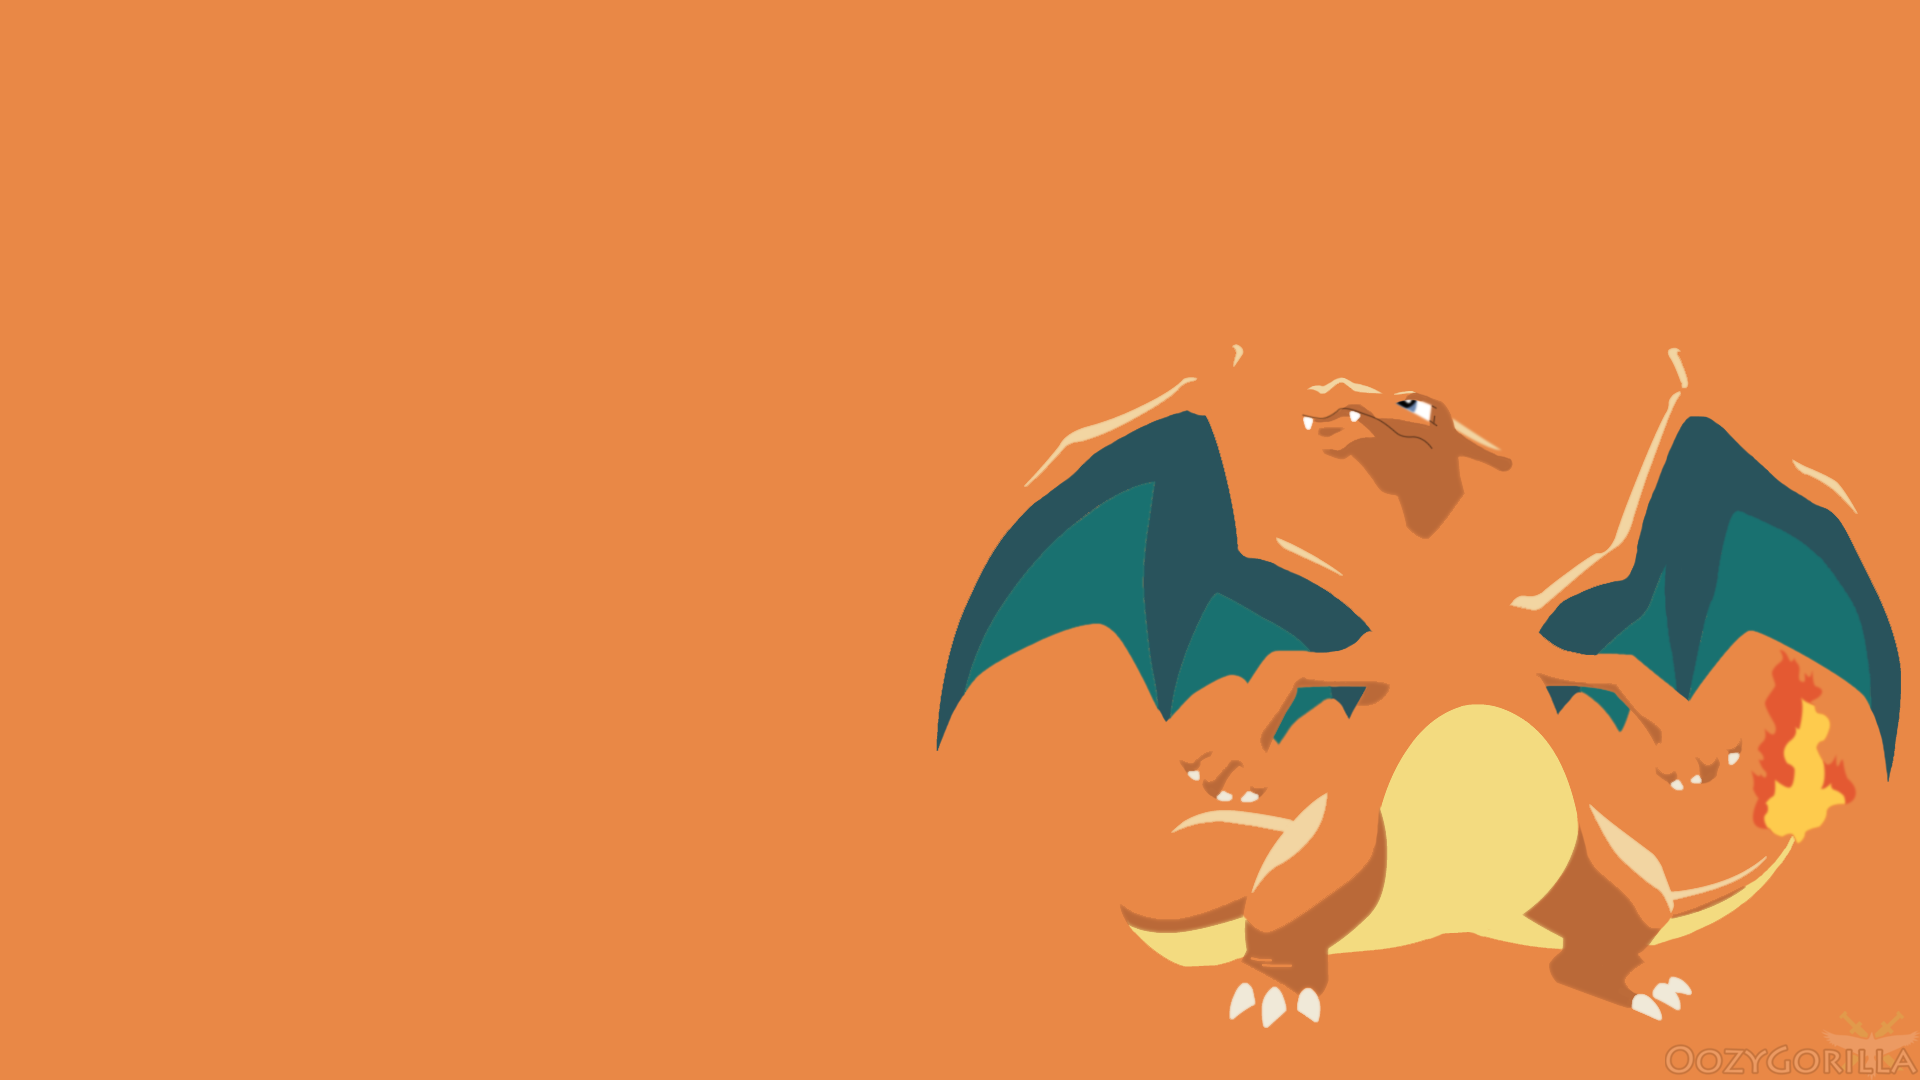 Pokémon Charizard Wallpaper  drawingwithdungs Kofi Shop  Kofi   Where creators get support from fans through donations memberships shop  sales and more The original Buy Me a Coffee Page